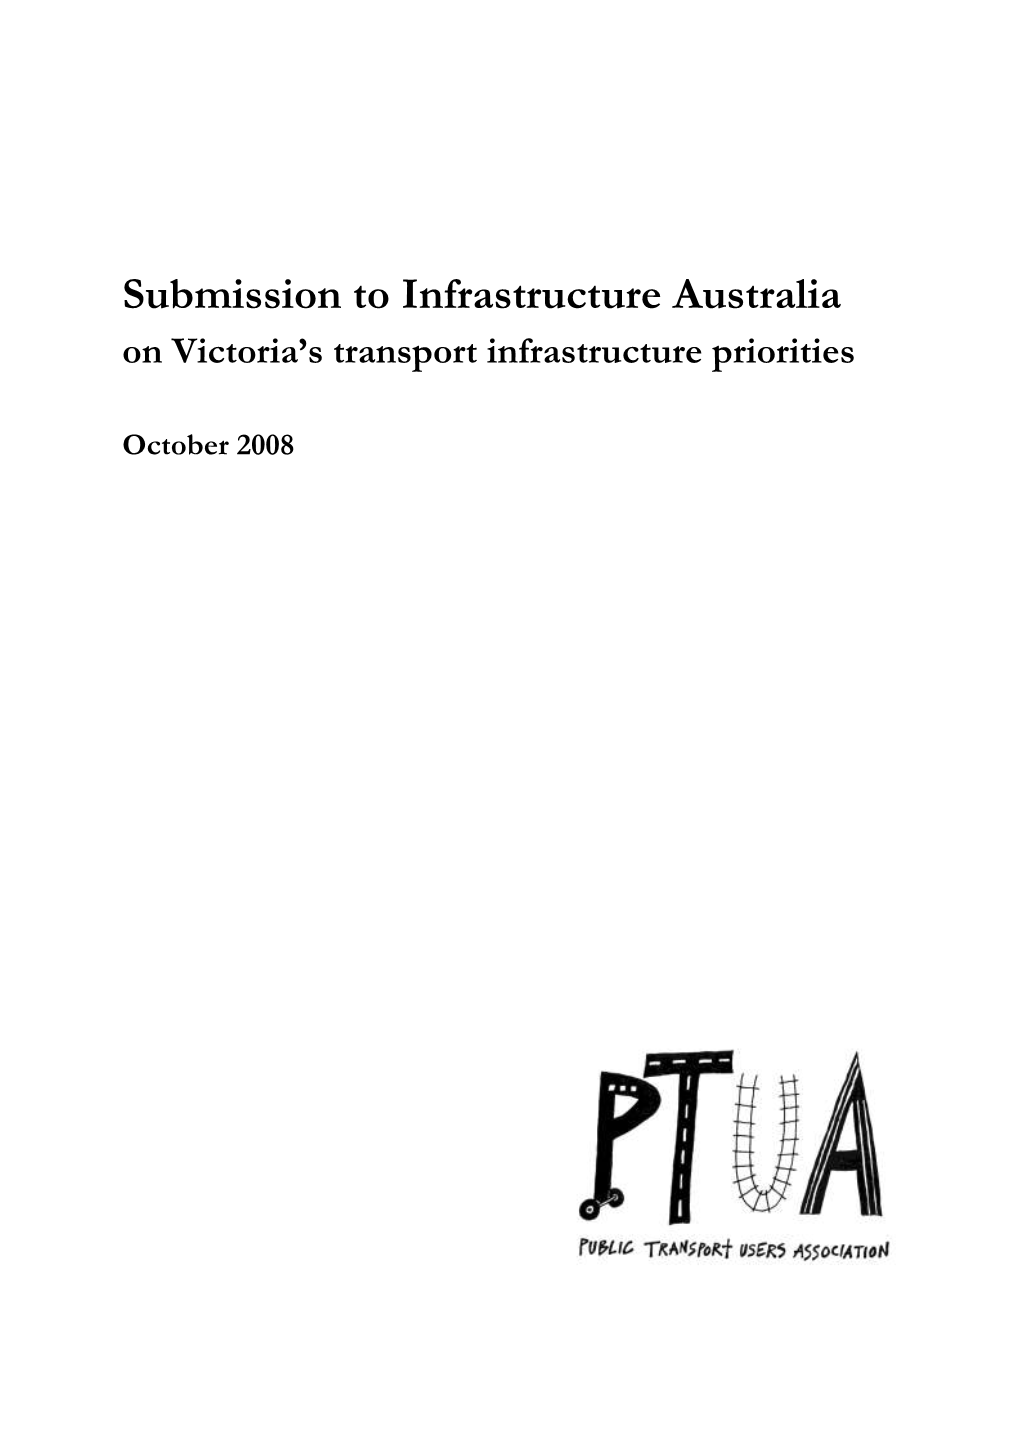 Submission to Infrastructure Australia on Victoria's Transport Infrastructure